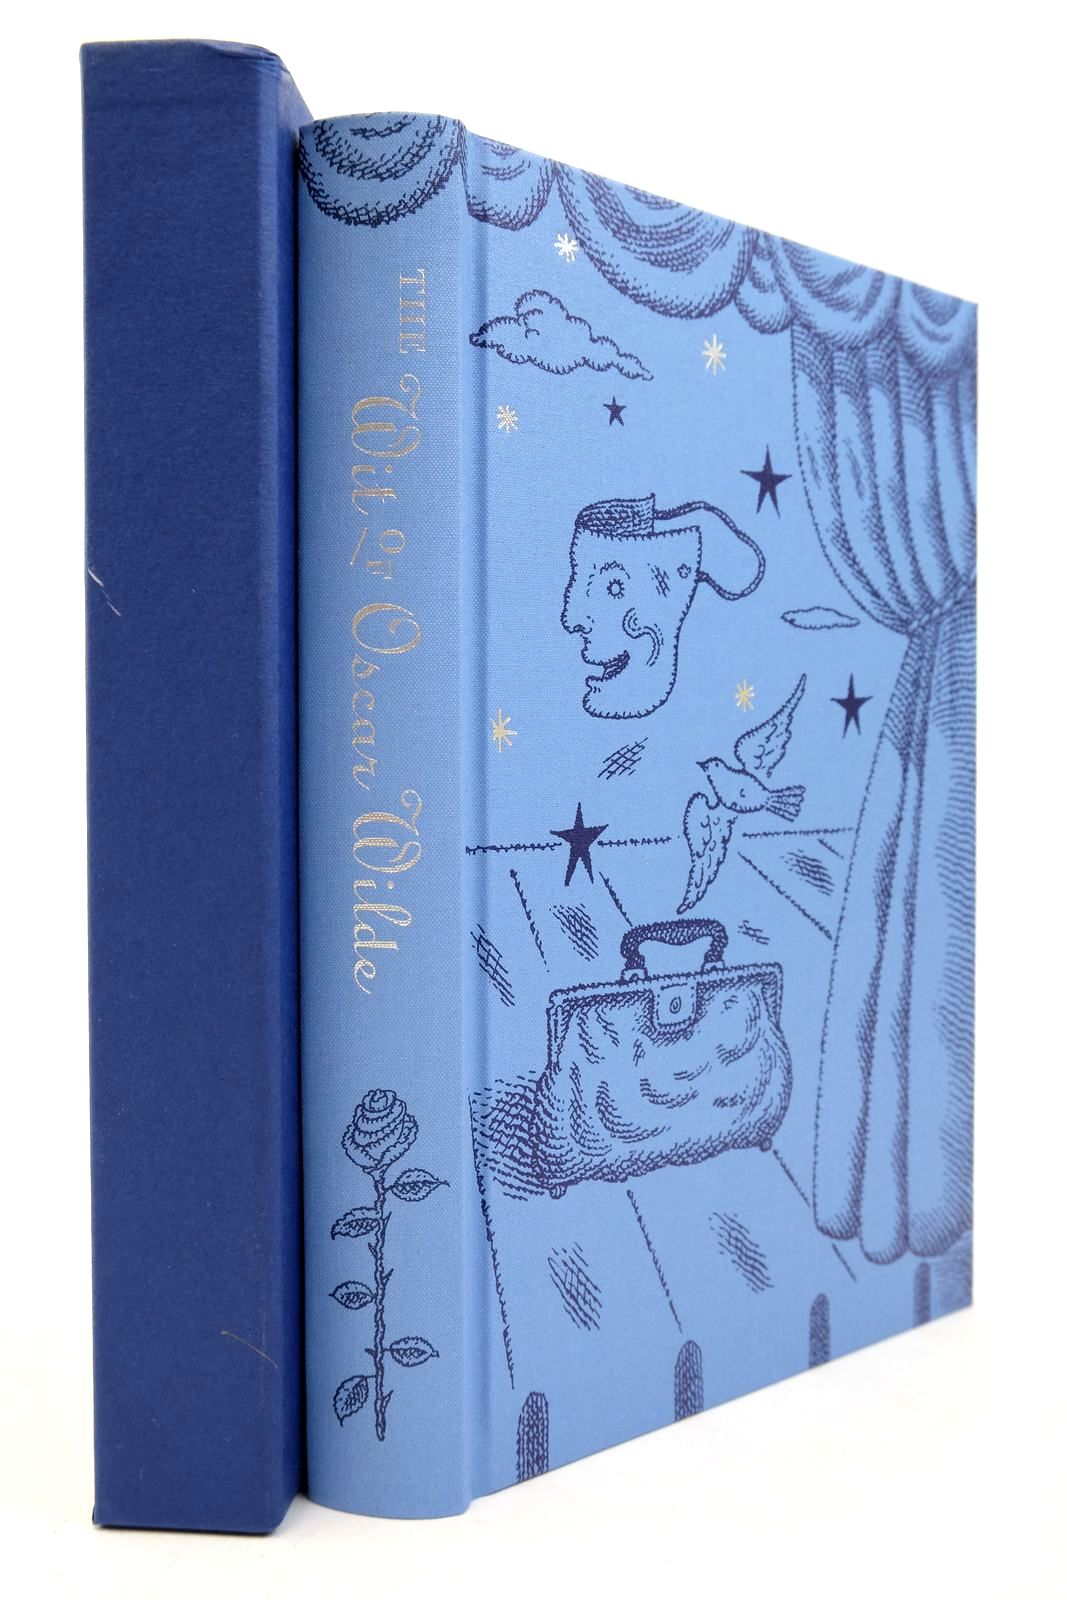 Photo of THE WIT OF OSCAR WILDE written by Wilde, Oscar Holland, Merlin illustrated by Beck, Ian Archie published by Folio Society (STOCK CODE: 2139212)  for sale by Stella & Rose's Books